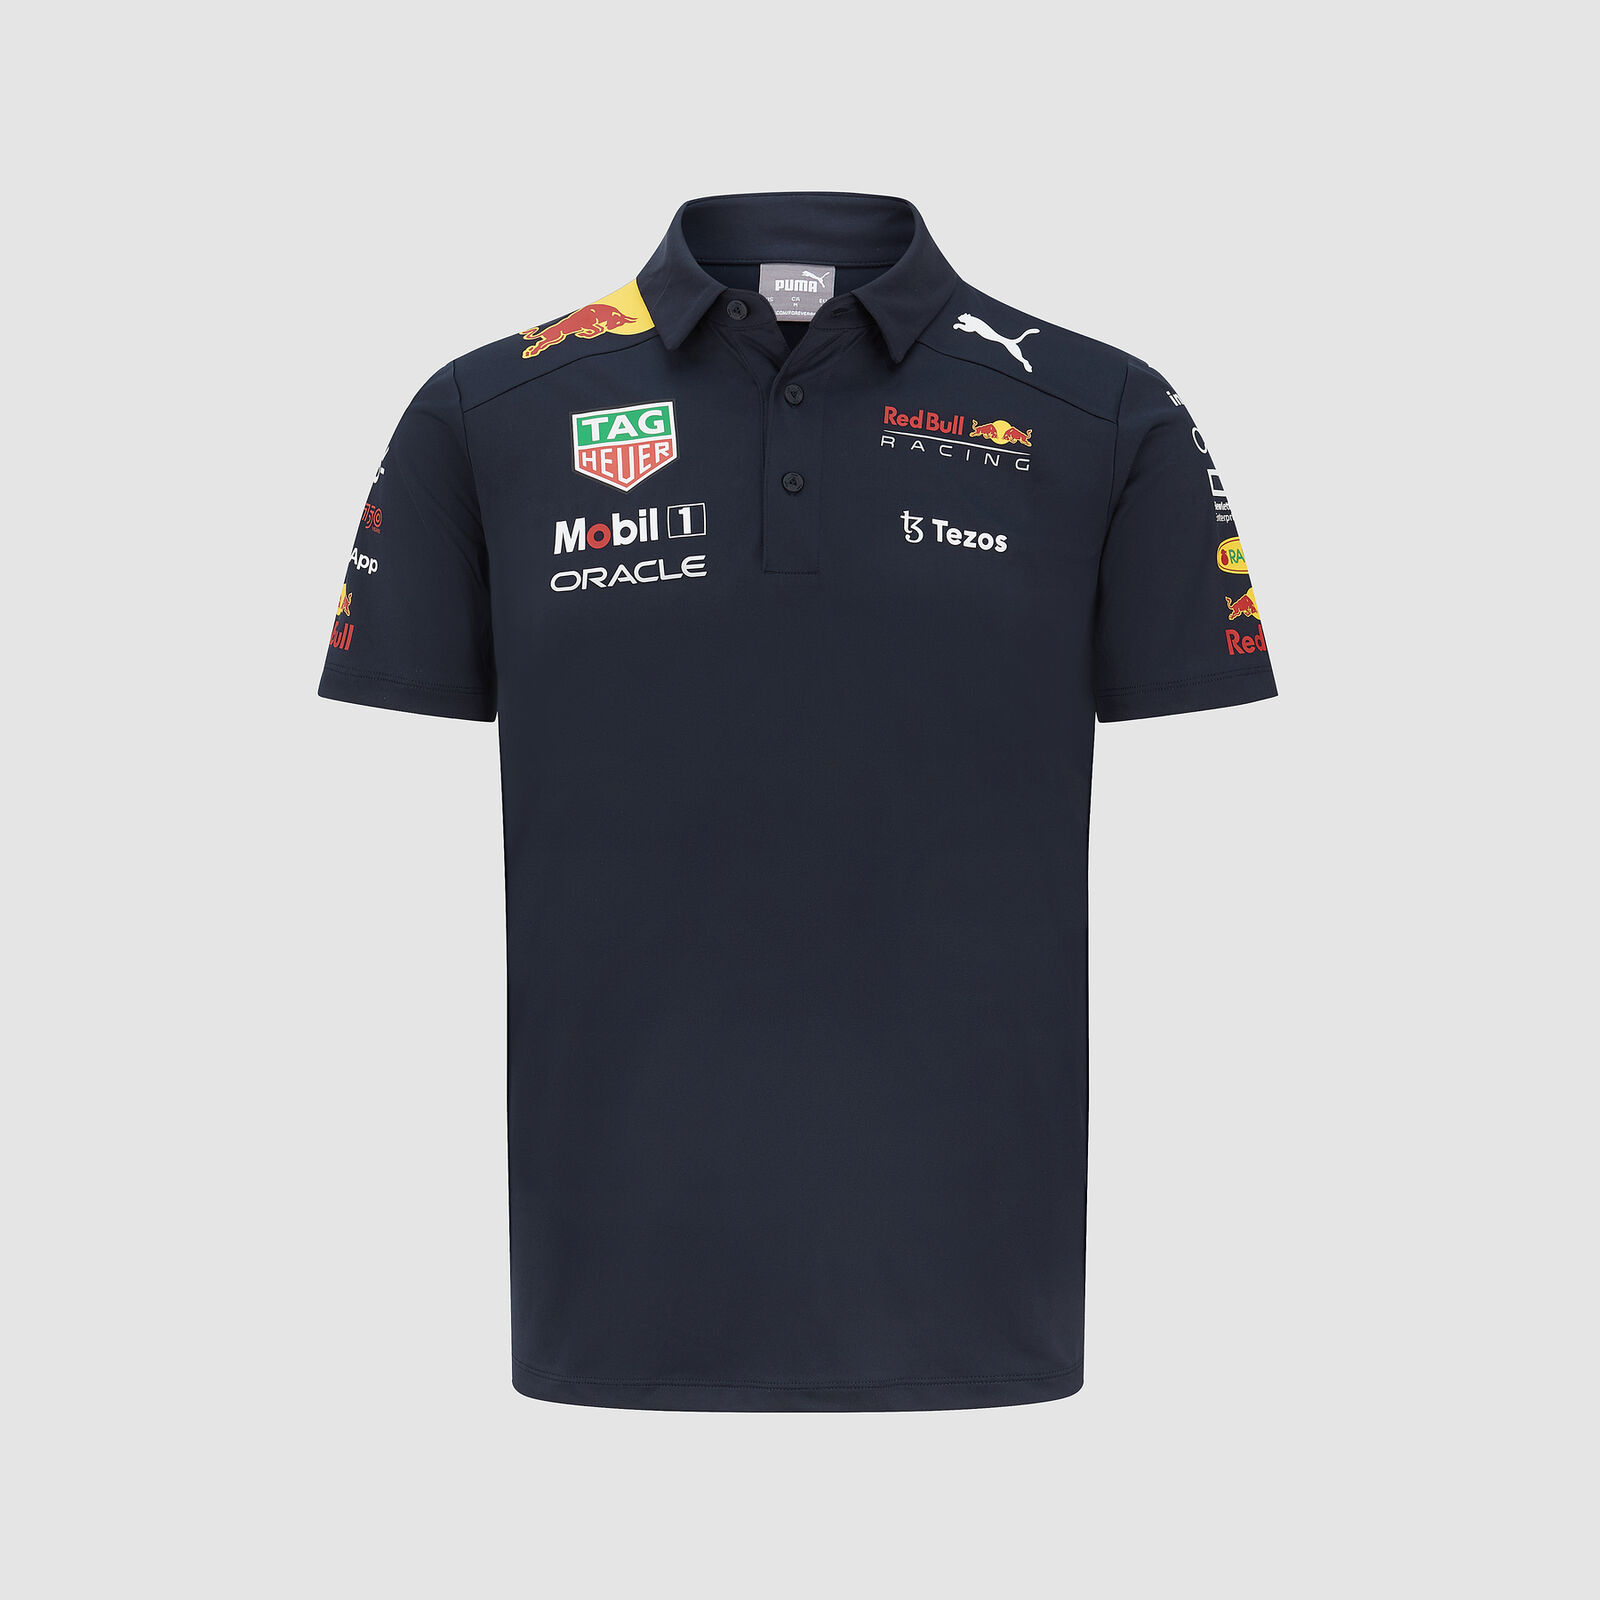 After an eternity, my first Red Bull Racing polo shirt is finally here and  it's even more beautiful in person 😍. Received it as a birthday surprise  from my girlfriend 🥰 : r/RedBullRacing